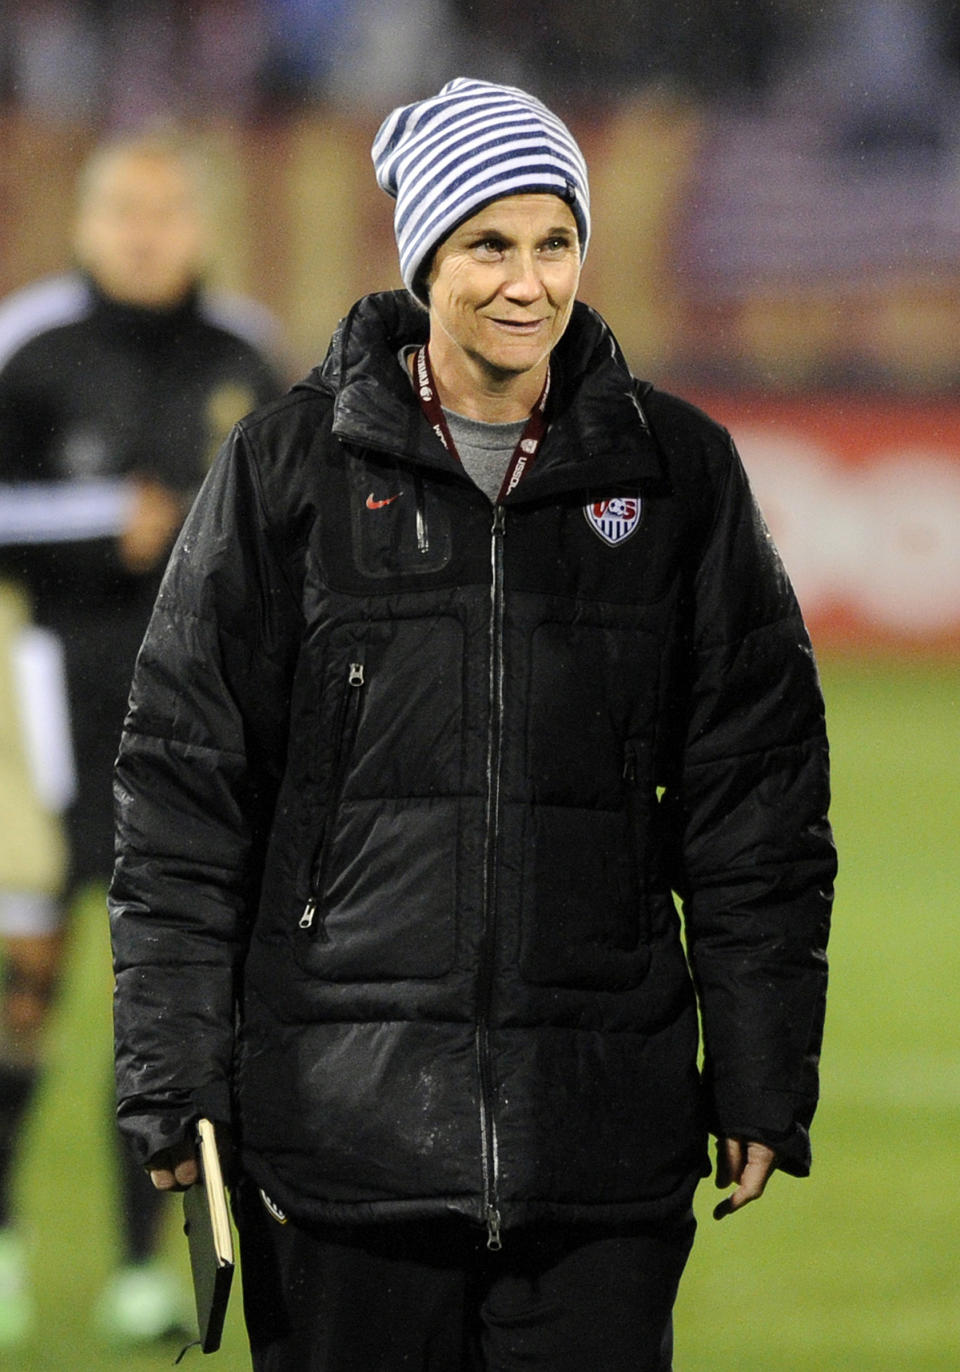 FILE - In this Oct. 23, 2012 file photo, U.S. coach Jill Ellis reacts after her team's 2-2 tie with Germany in an international friendly soccer match in East Hartford, Conn. U.S. Soccer Federation President Sunil Gulati is dismissing the idea that any sort of player mutiny led to the firing of women's coach Tom Sermanni. Jill Ellis, the USSF's director of development, will serve as interim coach. She went 5-0-2 in that role in 2012. The women's team faces China again on Thursday, April 10, 2014, in San Diego. (AP Photo/Fred Beckham, File)